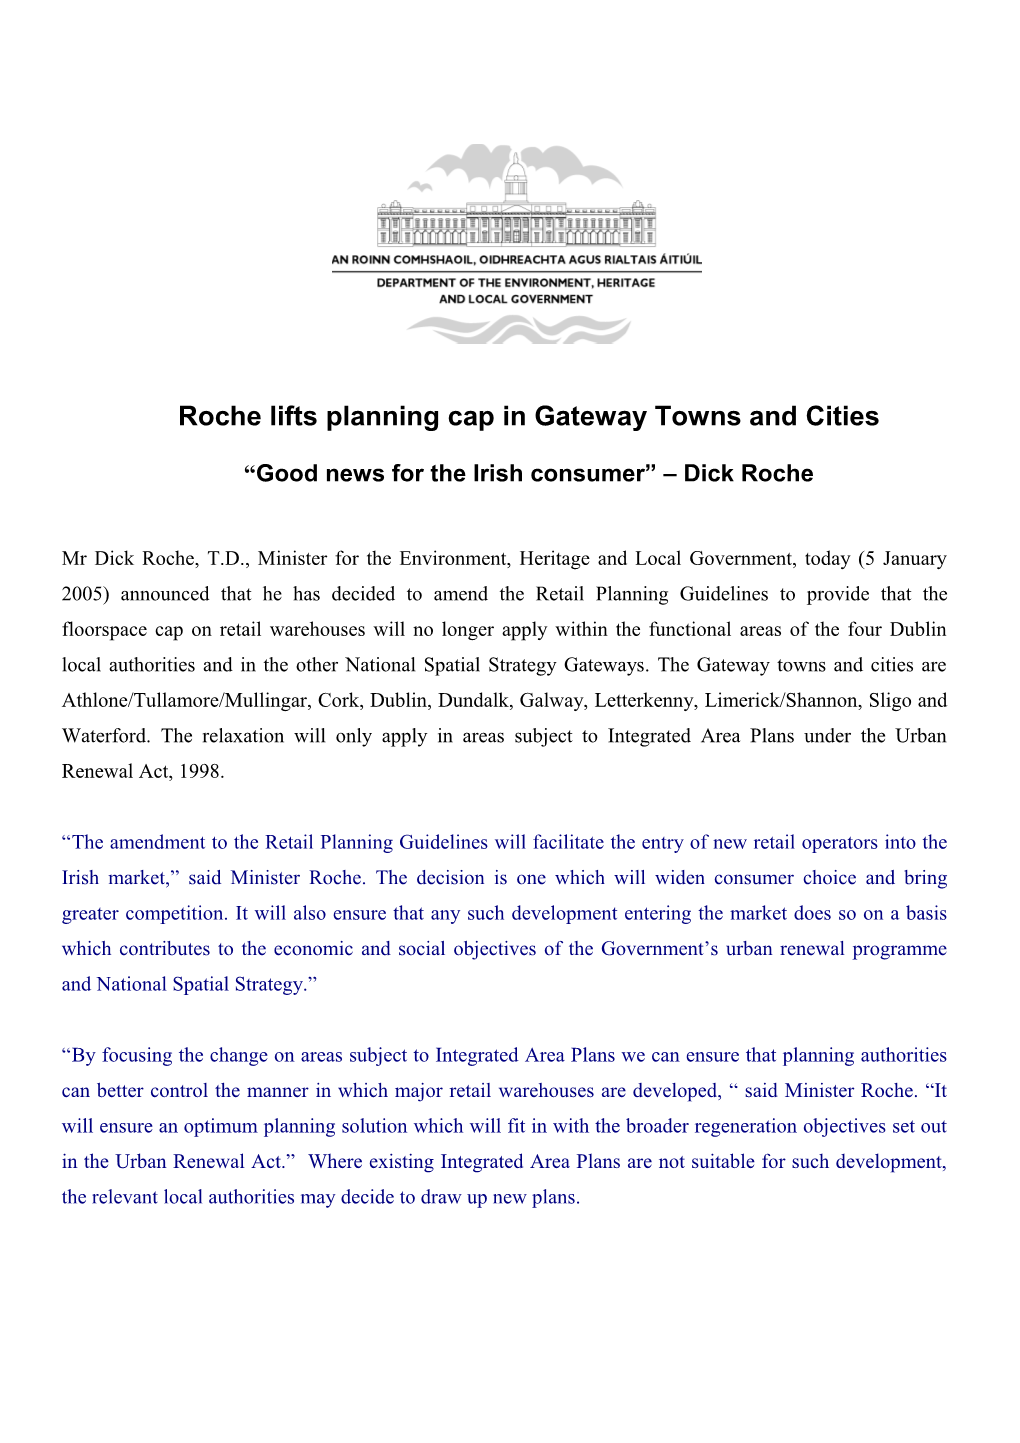 Roche Lifts Planning Cap in Gateway Towns and Cities Good News for the Irish Consumer